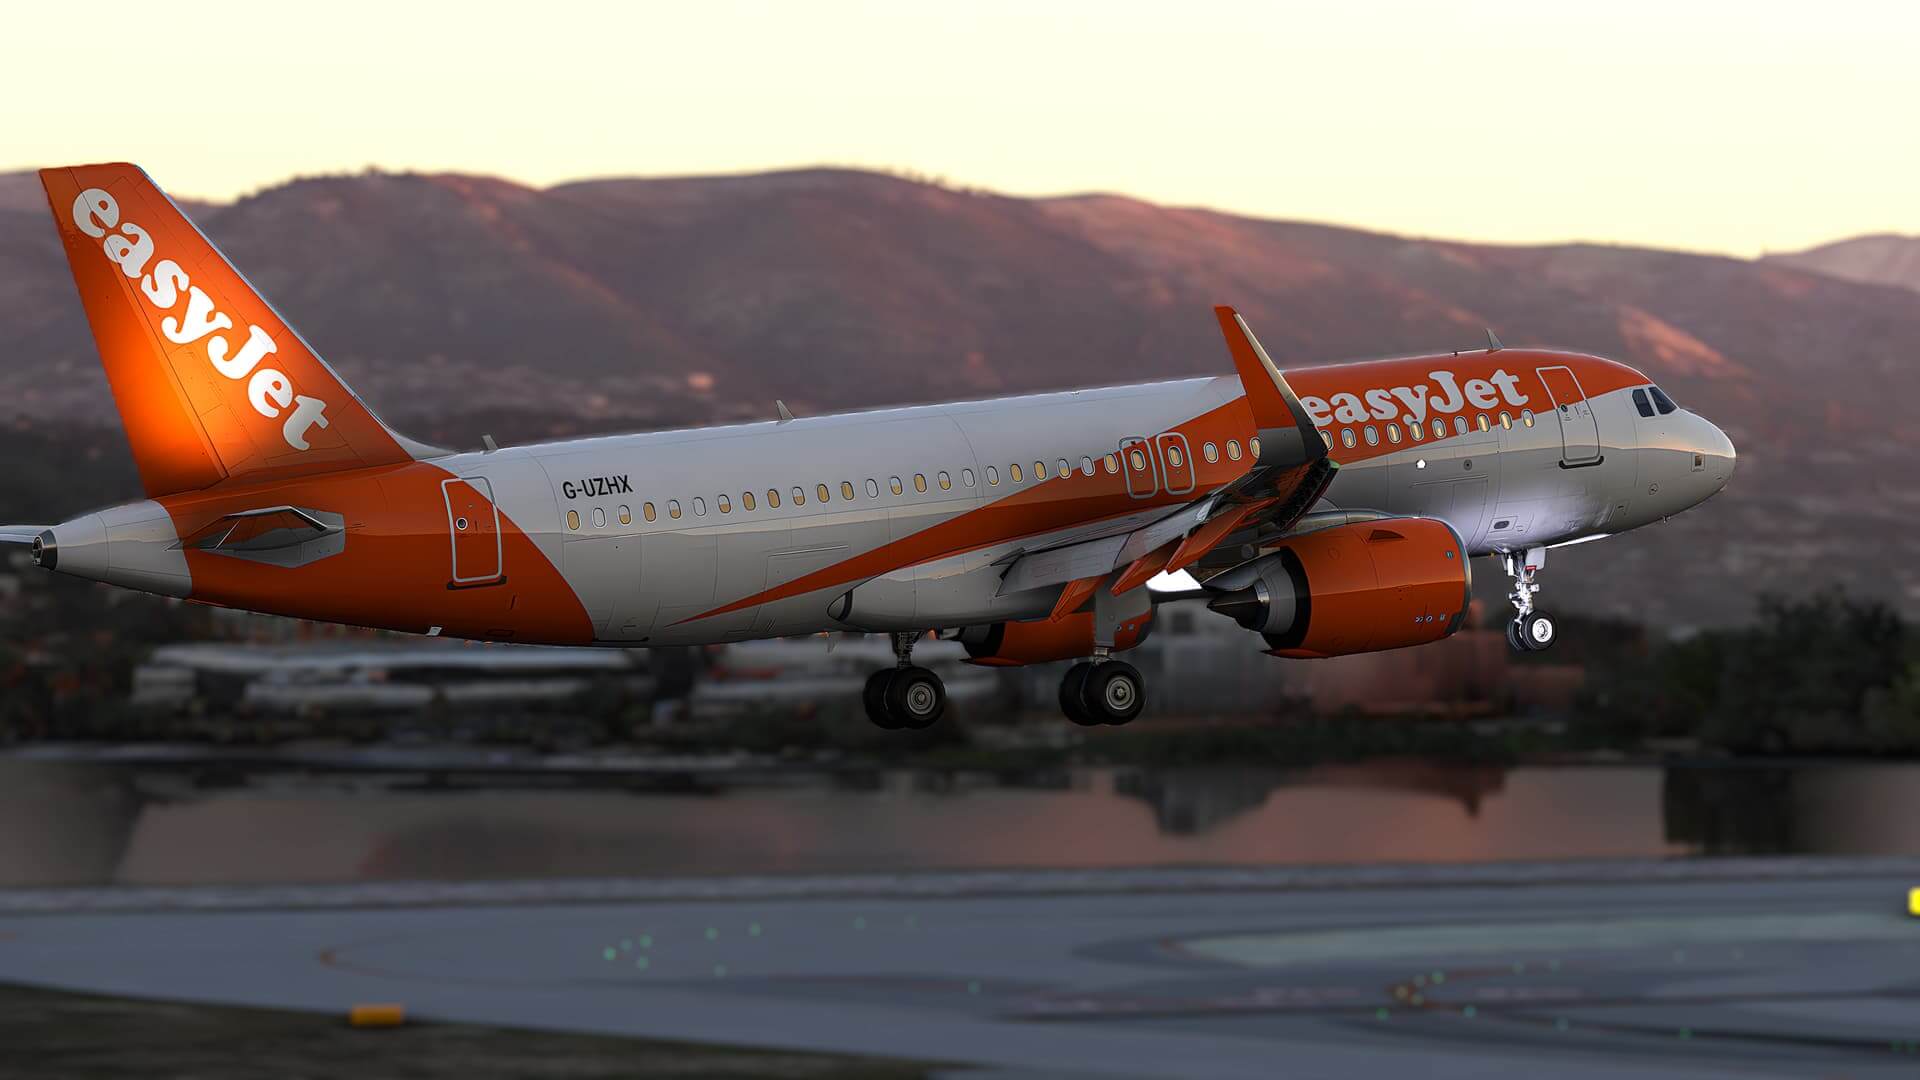 An EasyJet Airbus A320 NEO on short final to land at an airport.